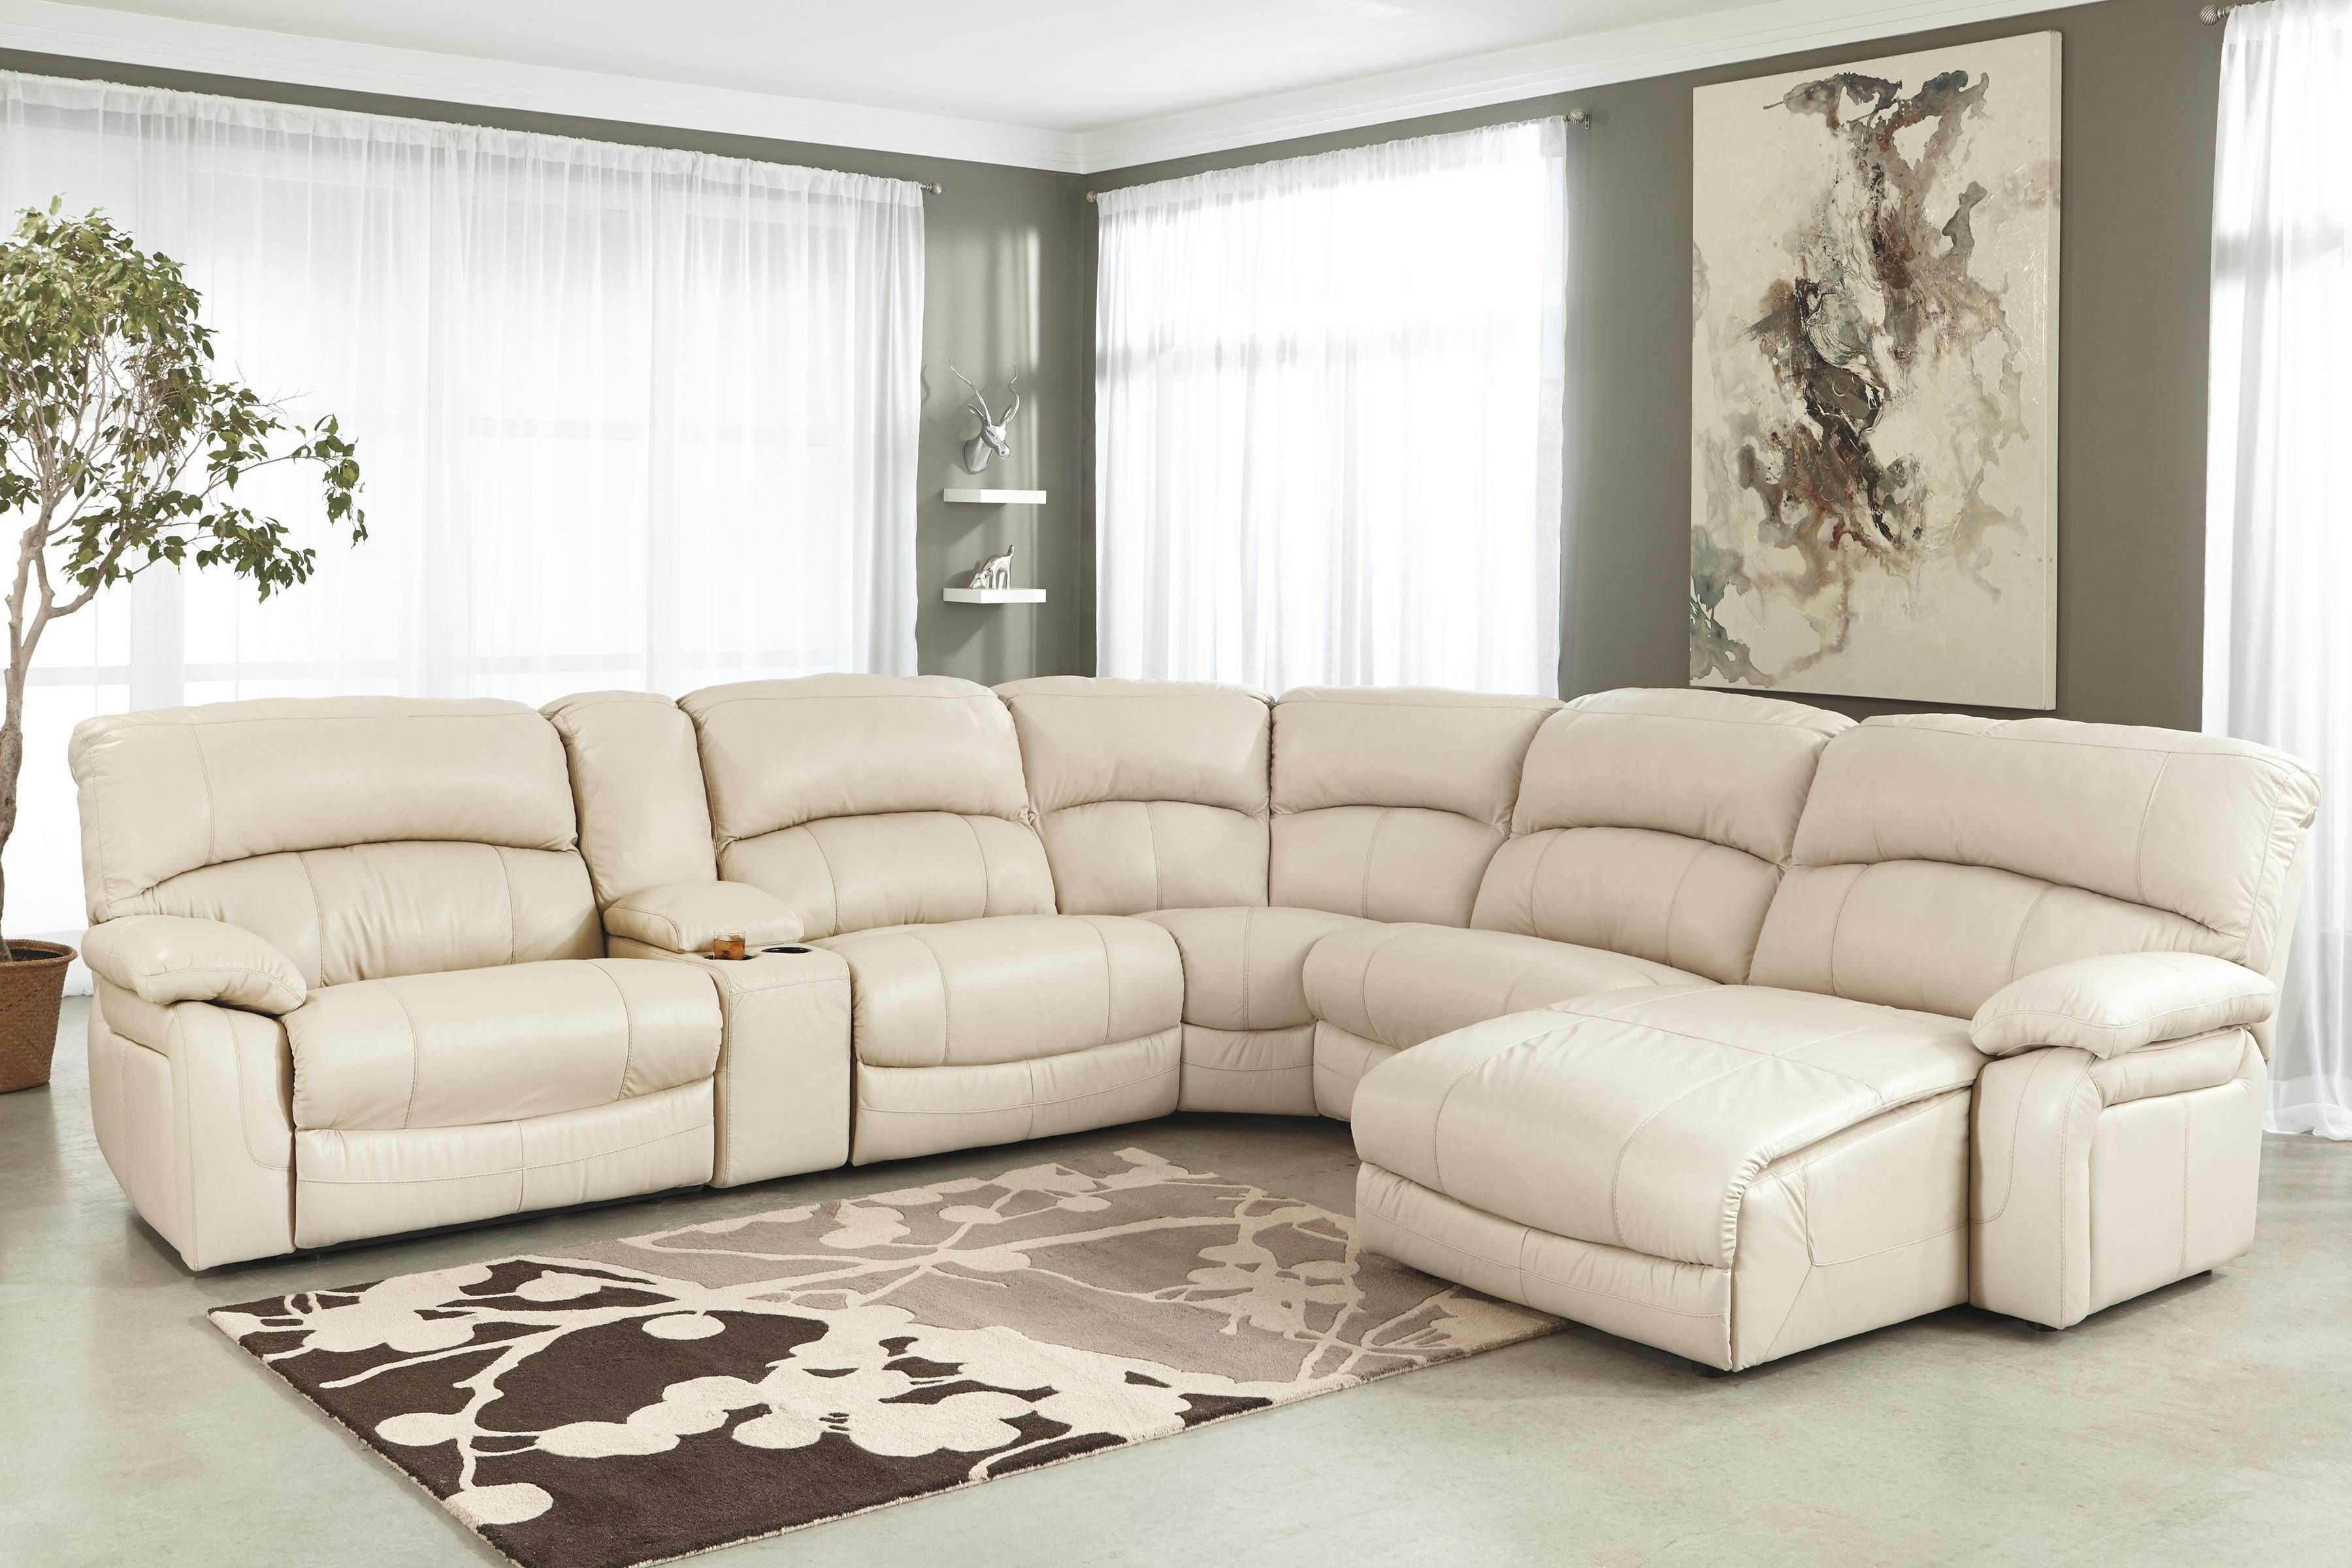 Furniture: Grey U Shaped Sectional Sofa With Nice Ottoman And Rug Throughout U Shaped Leather Sectional Sofa (View 3 of 25)